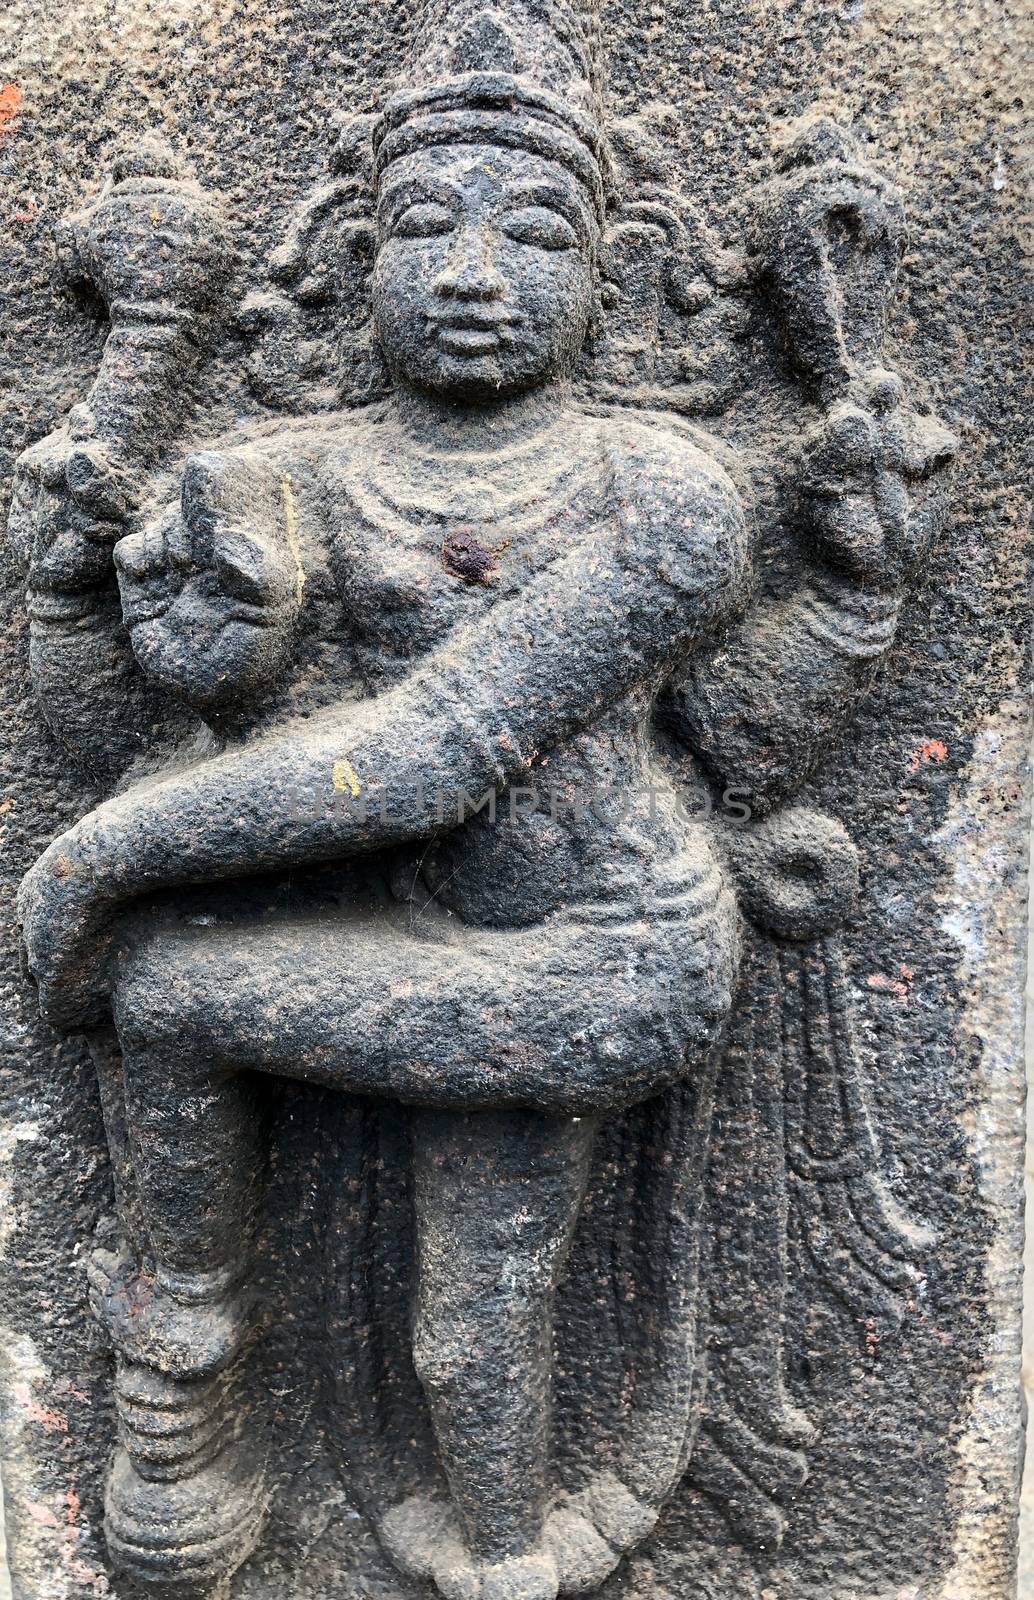 Goddess standing with one leg sculpture. Bas relief sculpture carved in the stone walls at Shiva temple in Tamil nadu by prabhakaran851